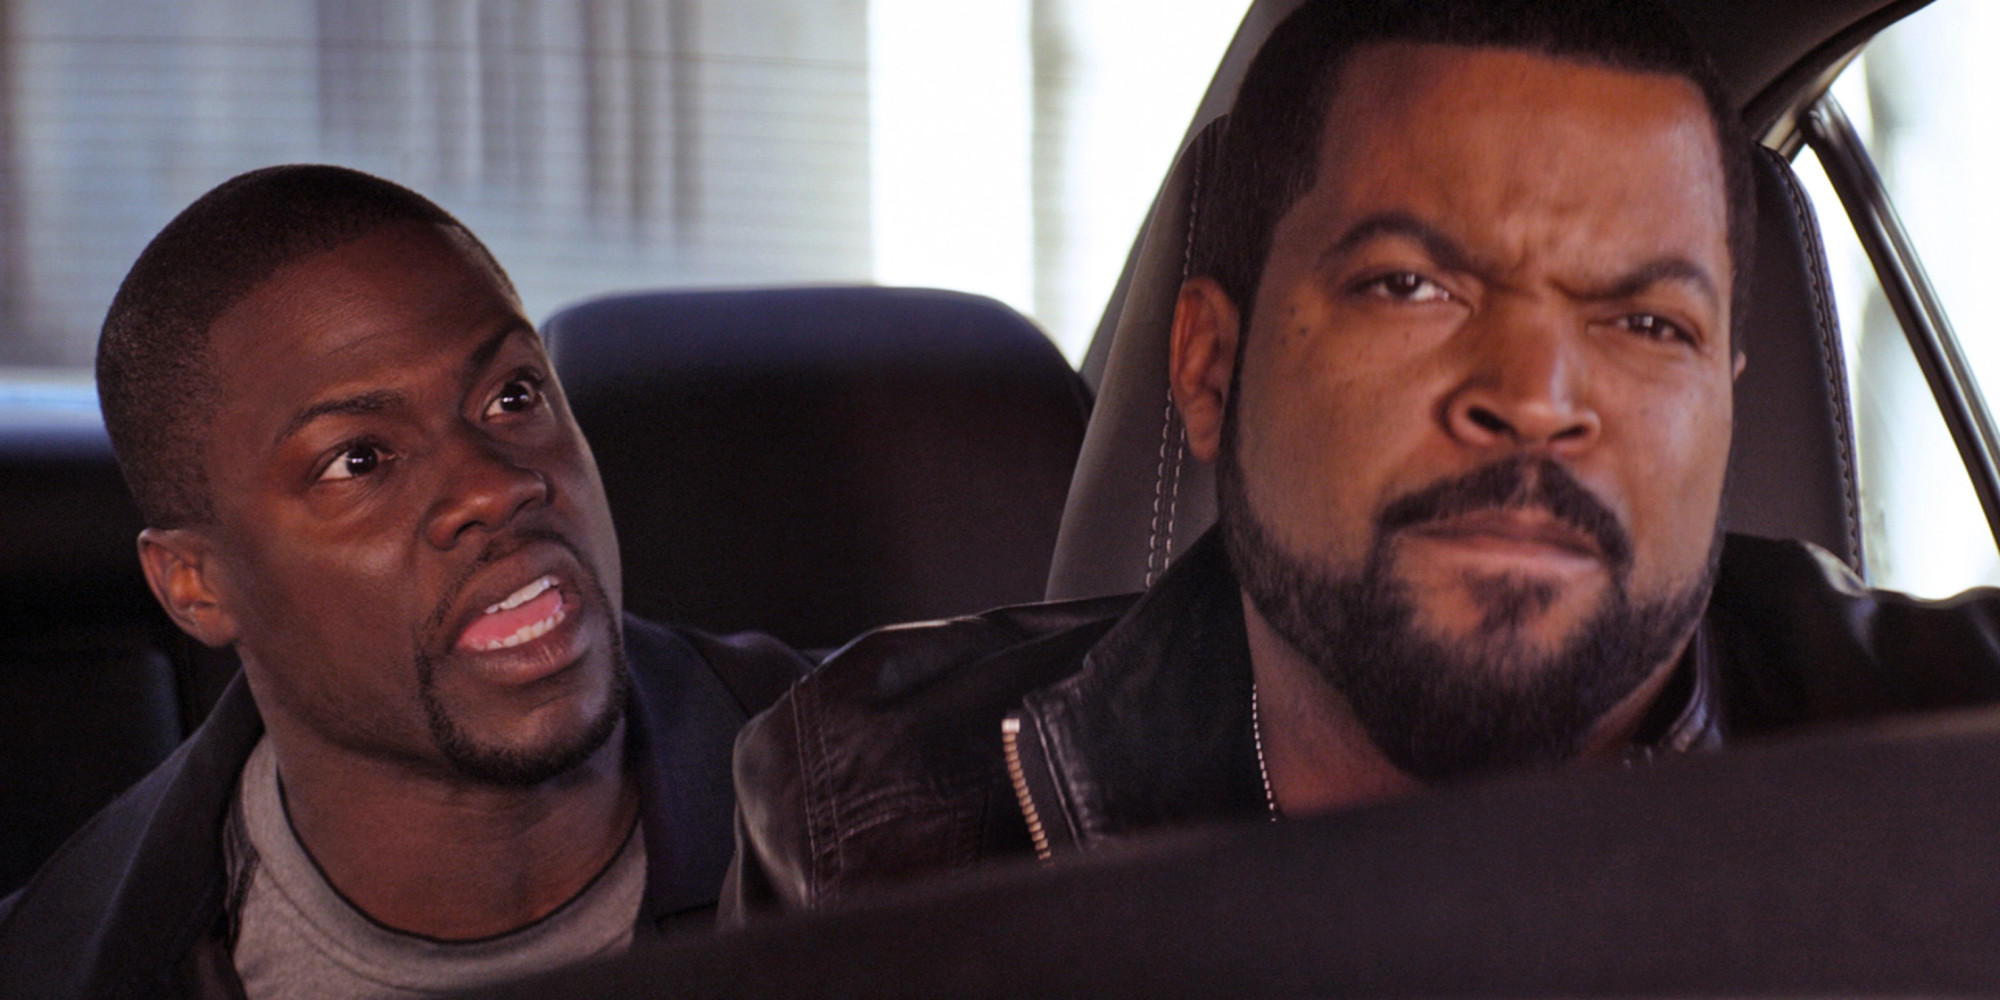 Kevin Hart And Ice Cube Are Back In 'Ride Along 2' | Film Trailer -  Conversations About HER